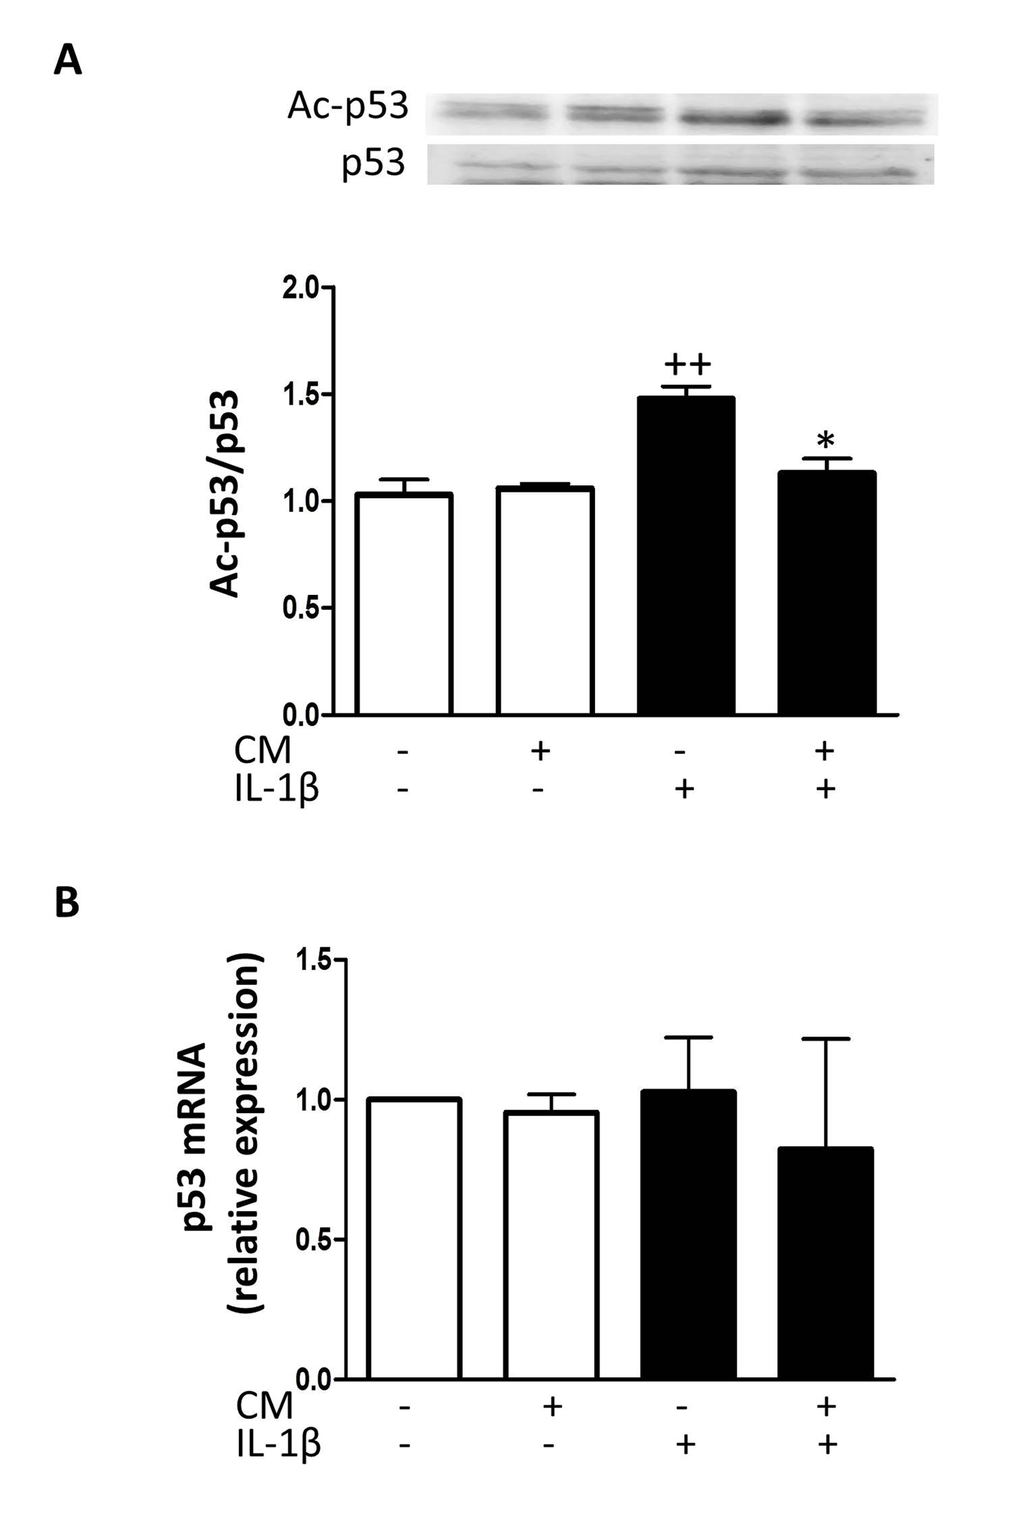 Effect of CM on p53. (A) Immunoblotting was performed for acetylated and total p53. (B) p53 mRNA expression was determined by quantitative real-time PCR. OA chondrocytes were incubated with IL-1β and/or CM for 24 hours. Data are shown as mean±standard deviation of N=4 separate experiments with cells from separate donors. ++p